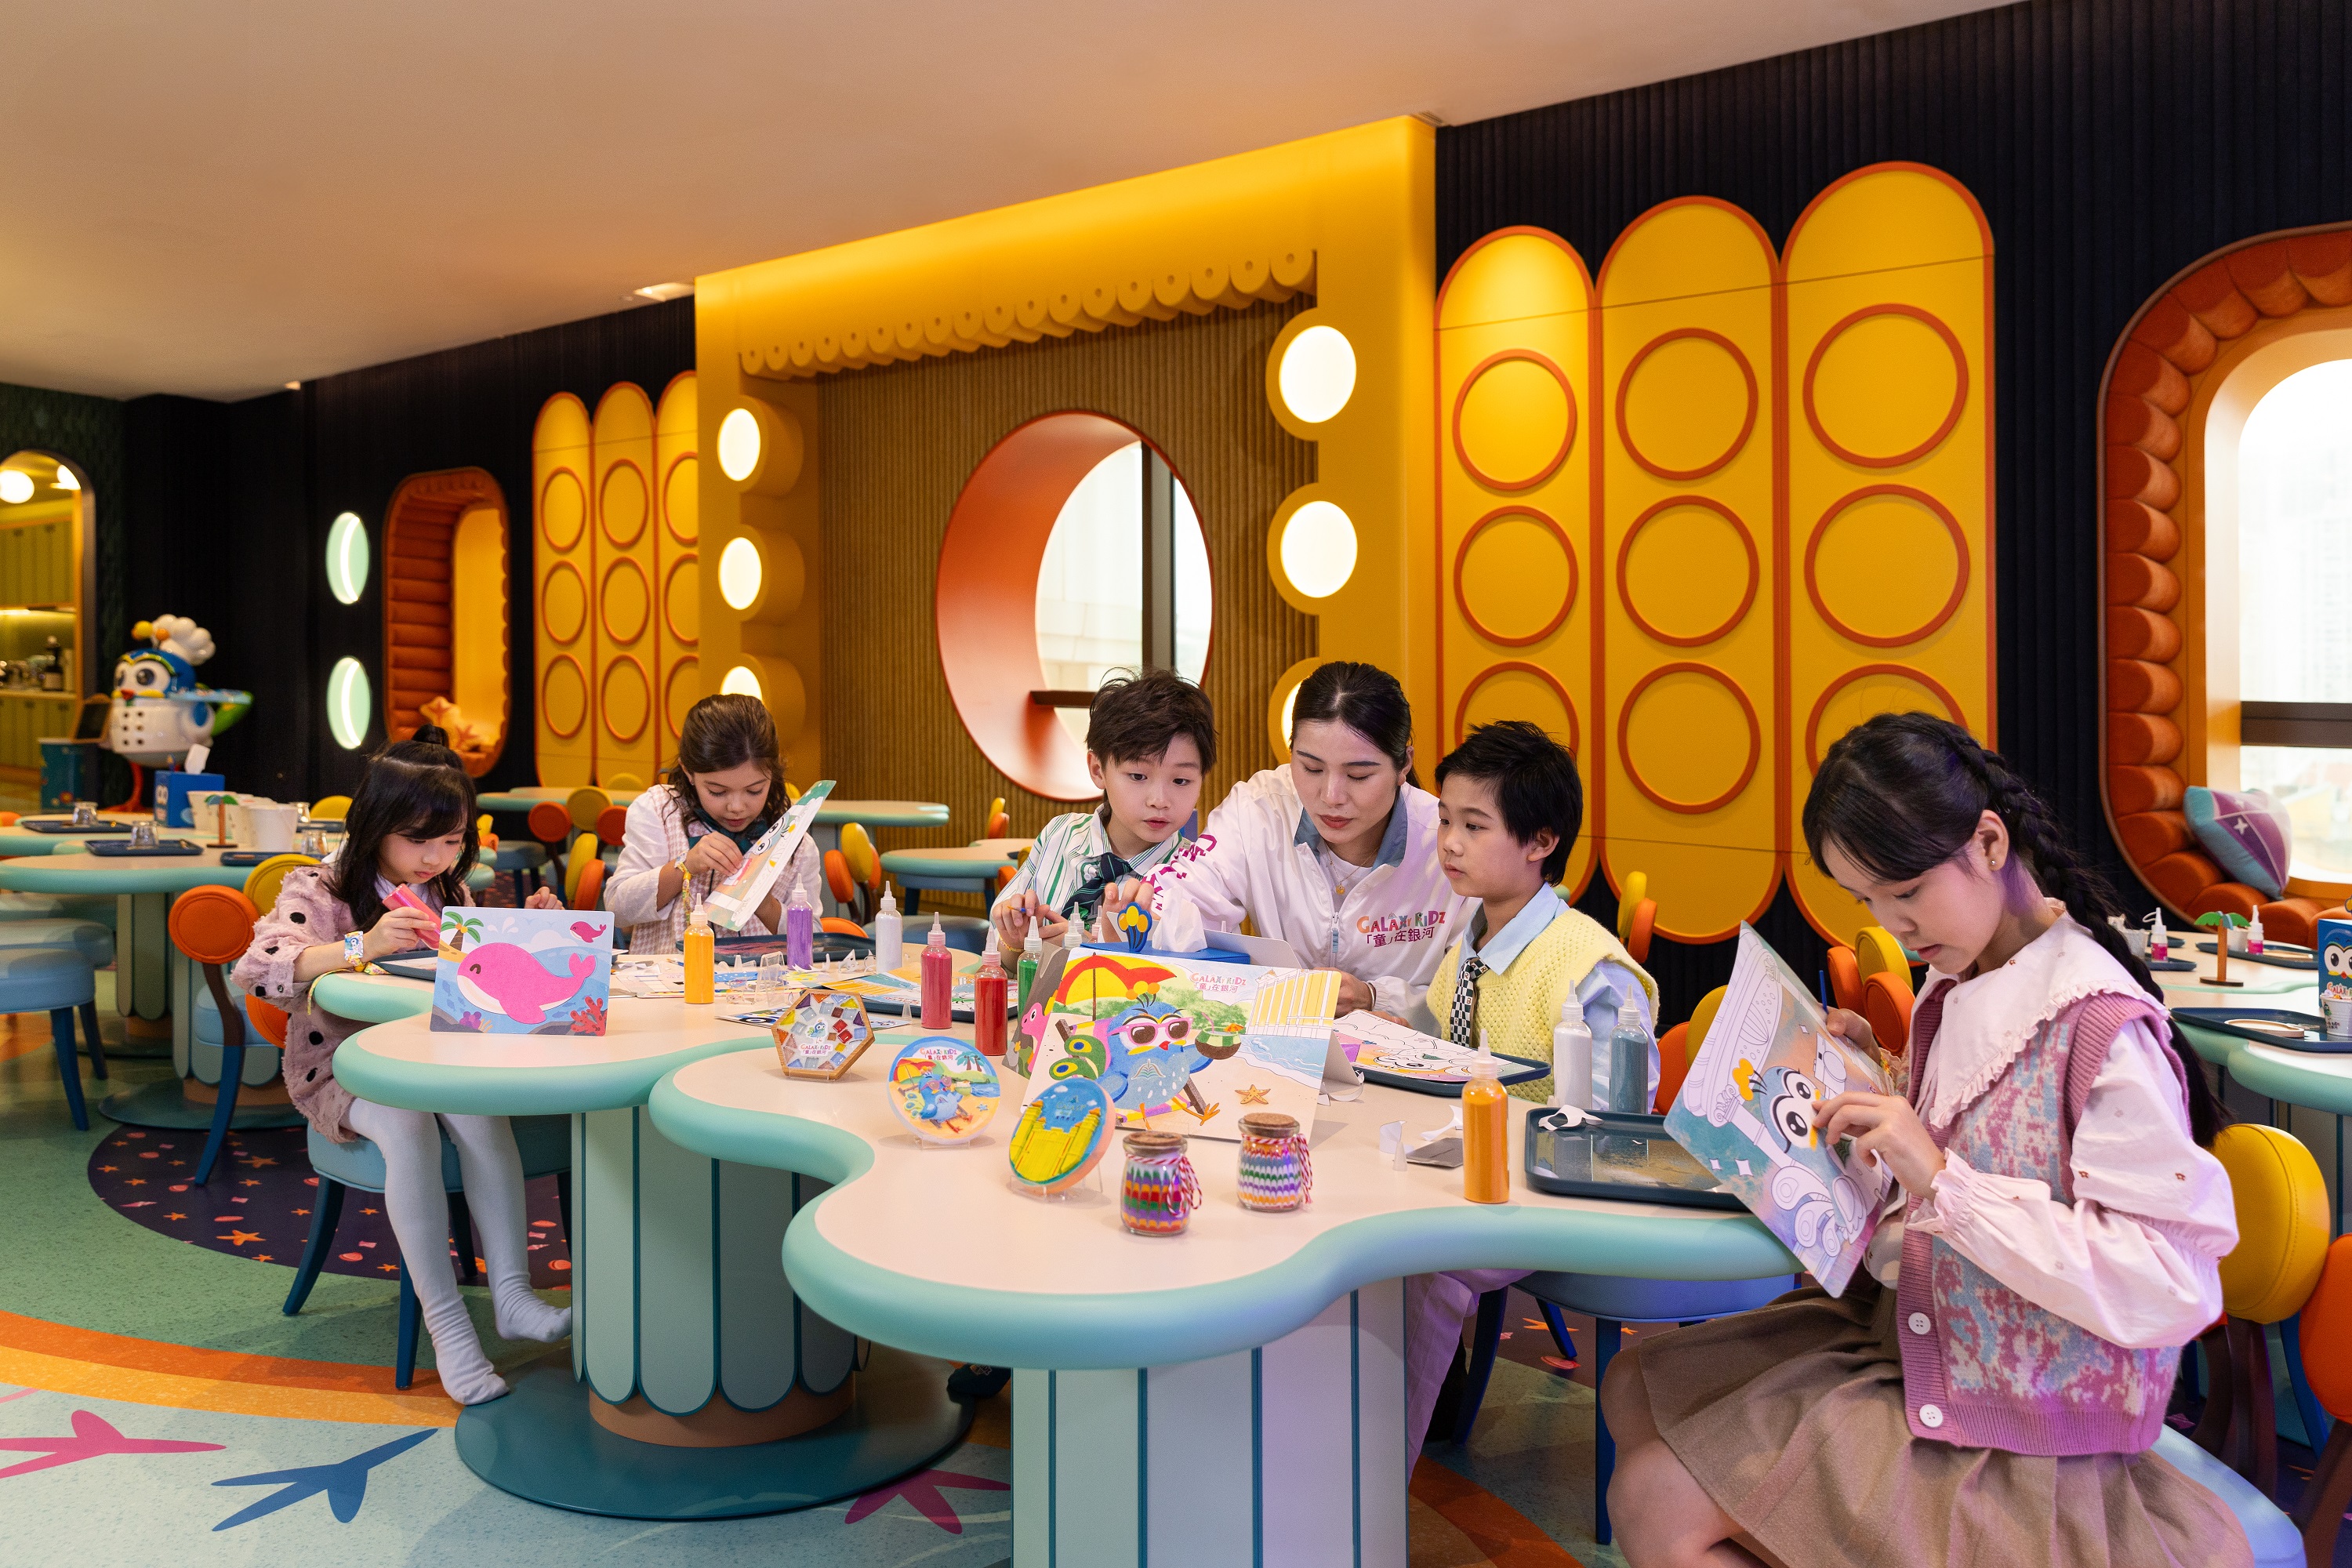 Featuring décor inspired by Wavey the peacock, along with a series of educational workshops, Galaxy Edutainment Center is the ideal choice for families and kids.